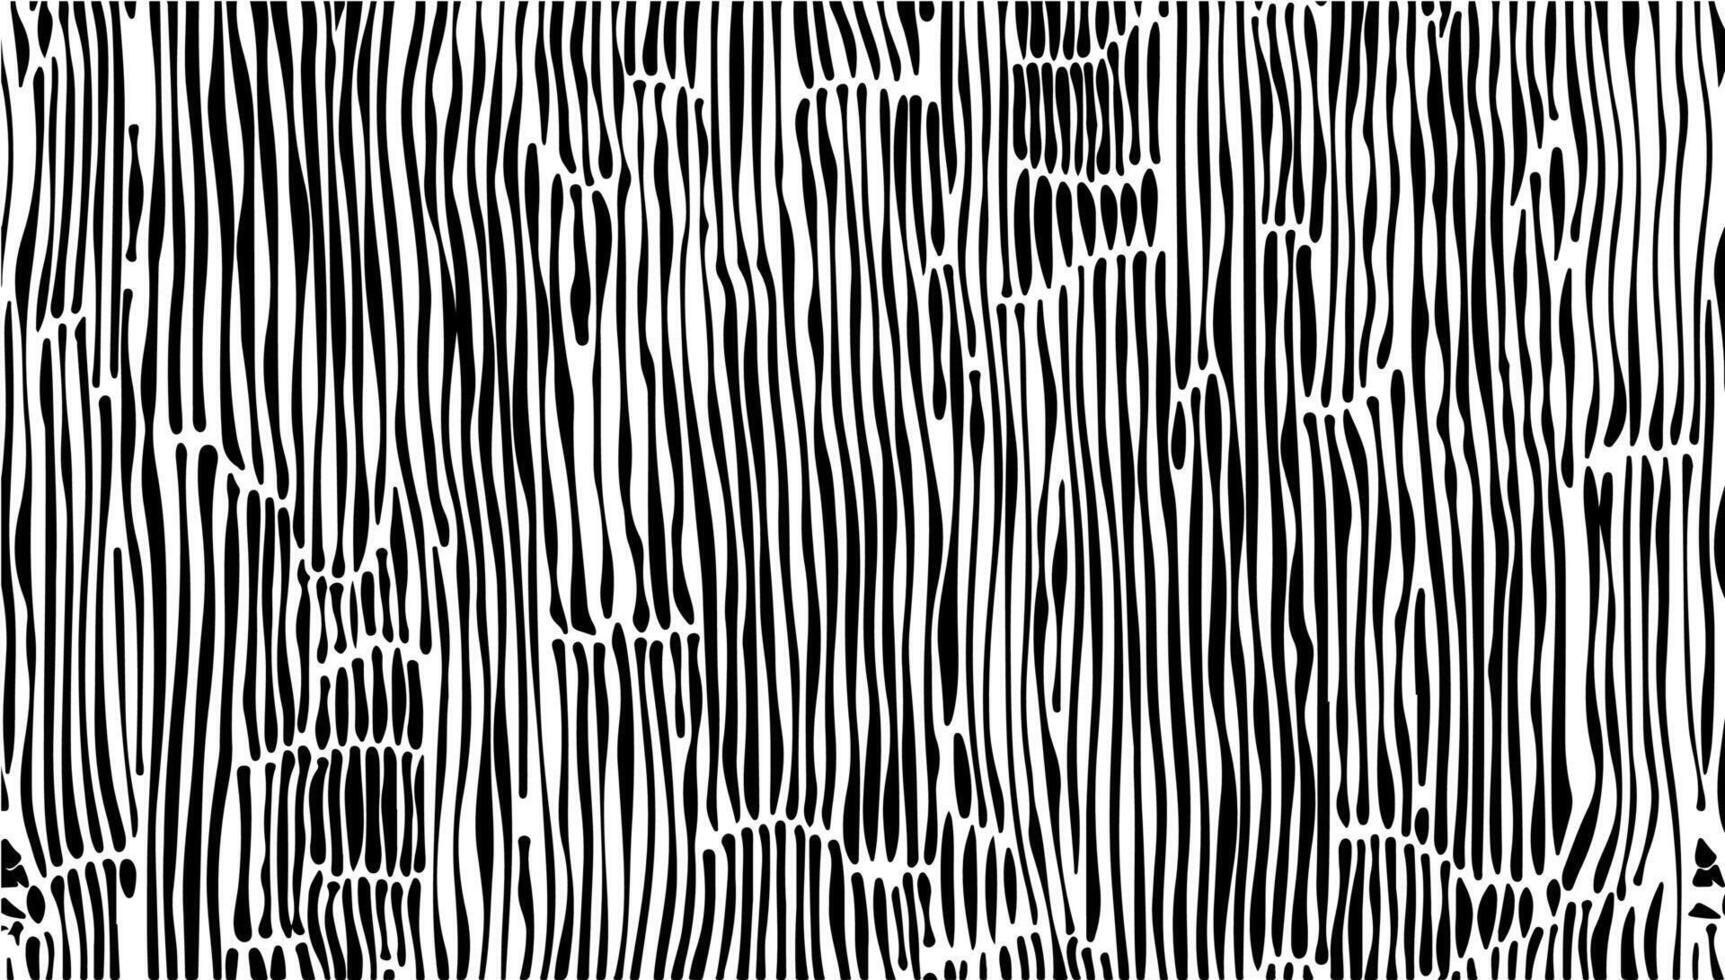 Fabric pattern with textile line texture image background. Decpratopn striped shape element and curve ornament. Artistic black and white elegant background vector